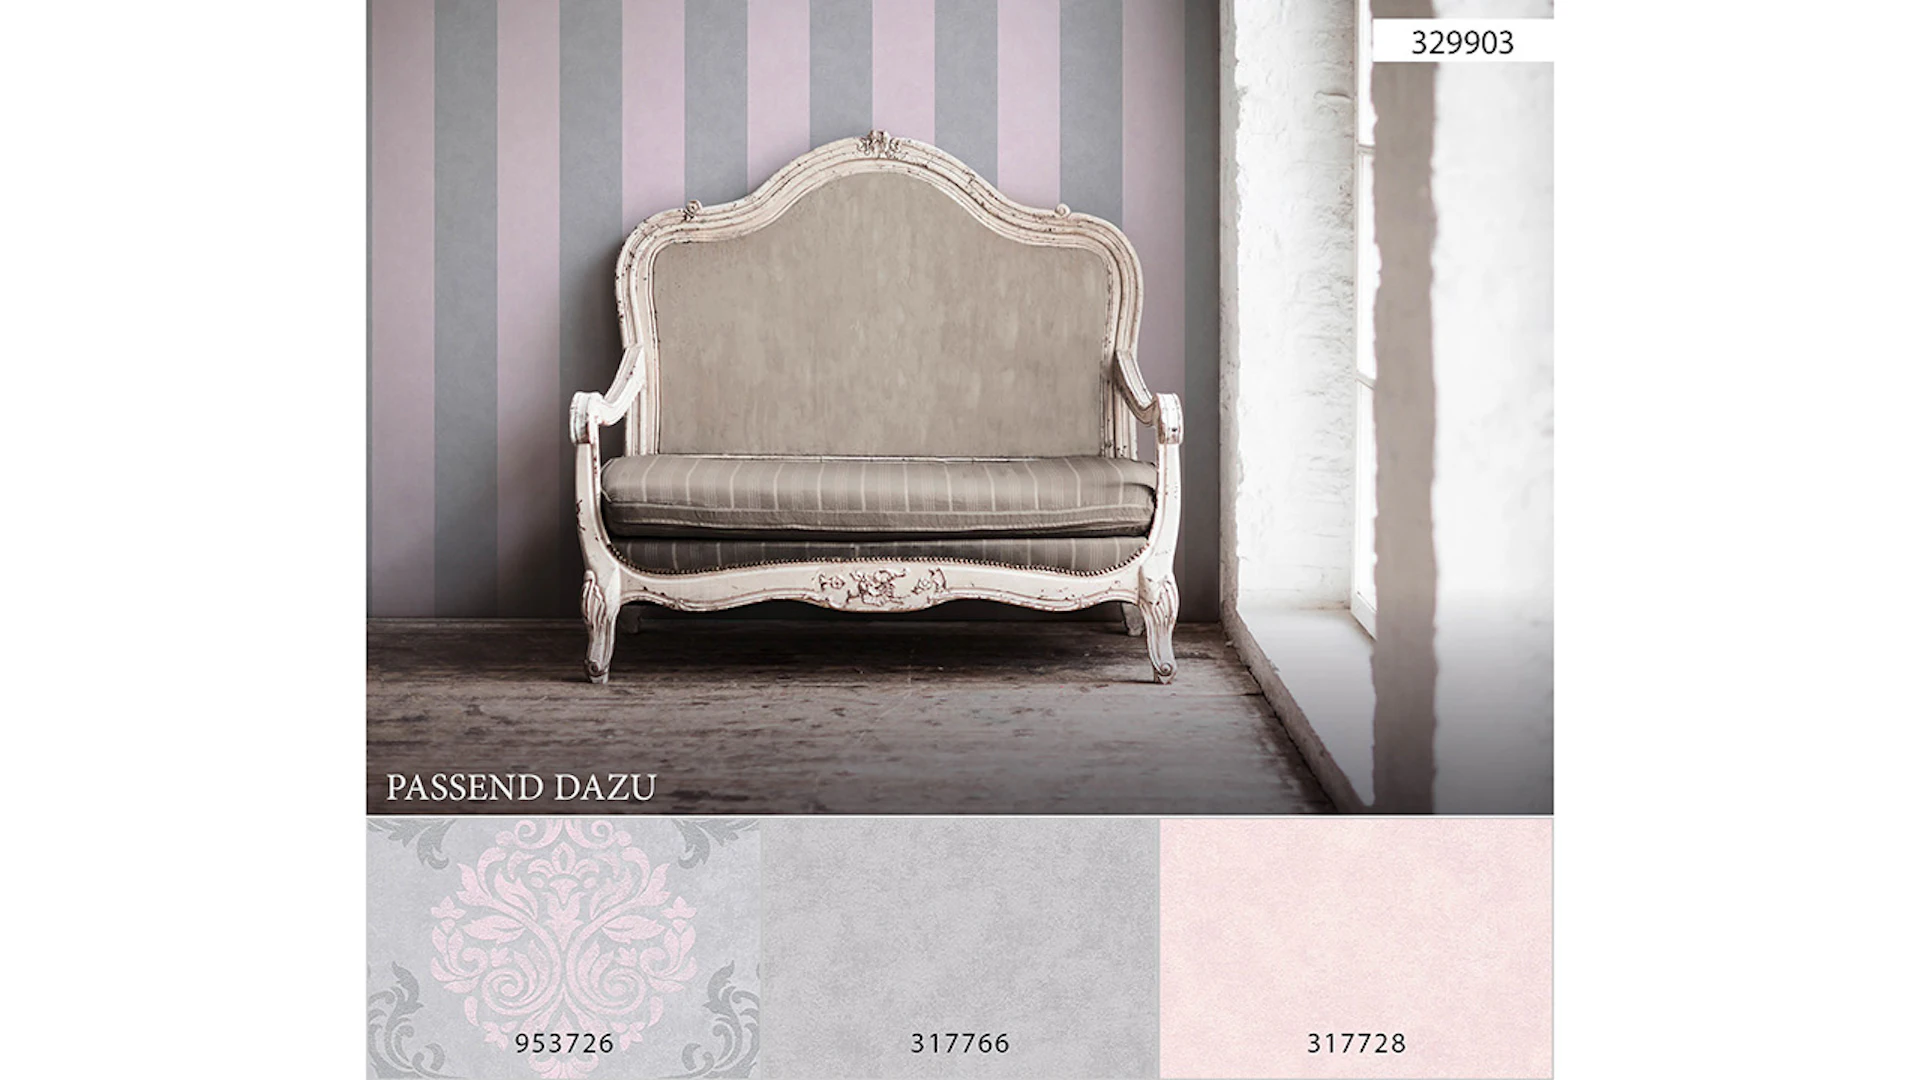 Vinyl wallpaper Memory 3 A.S. Création country style grey pink 903